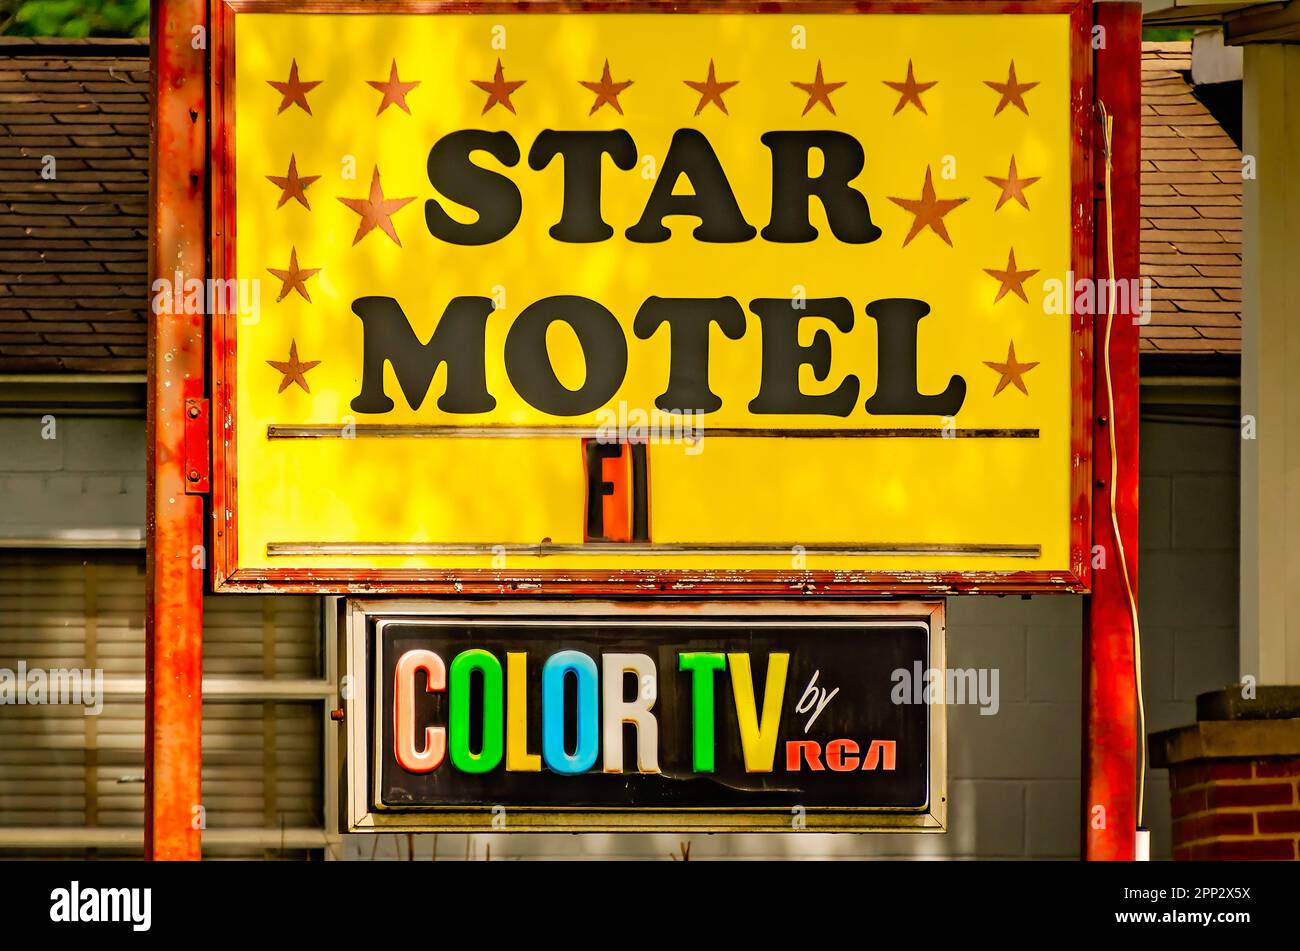 Star Motel advertises RCA color television among its amenities, April 16, 2023, in Bay Minette, Alabama. Stock Photo